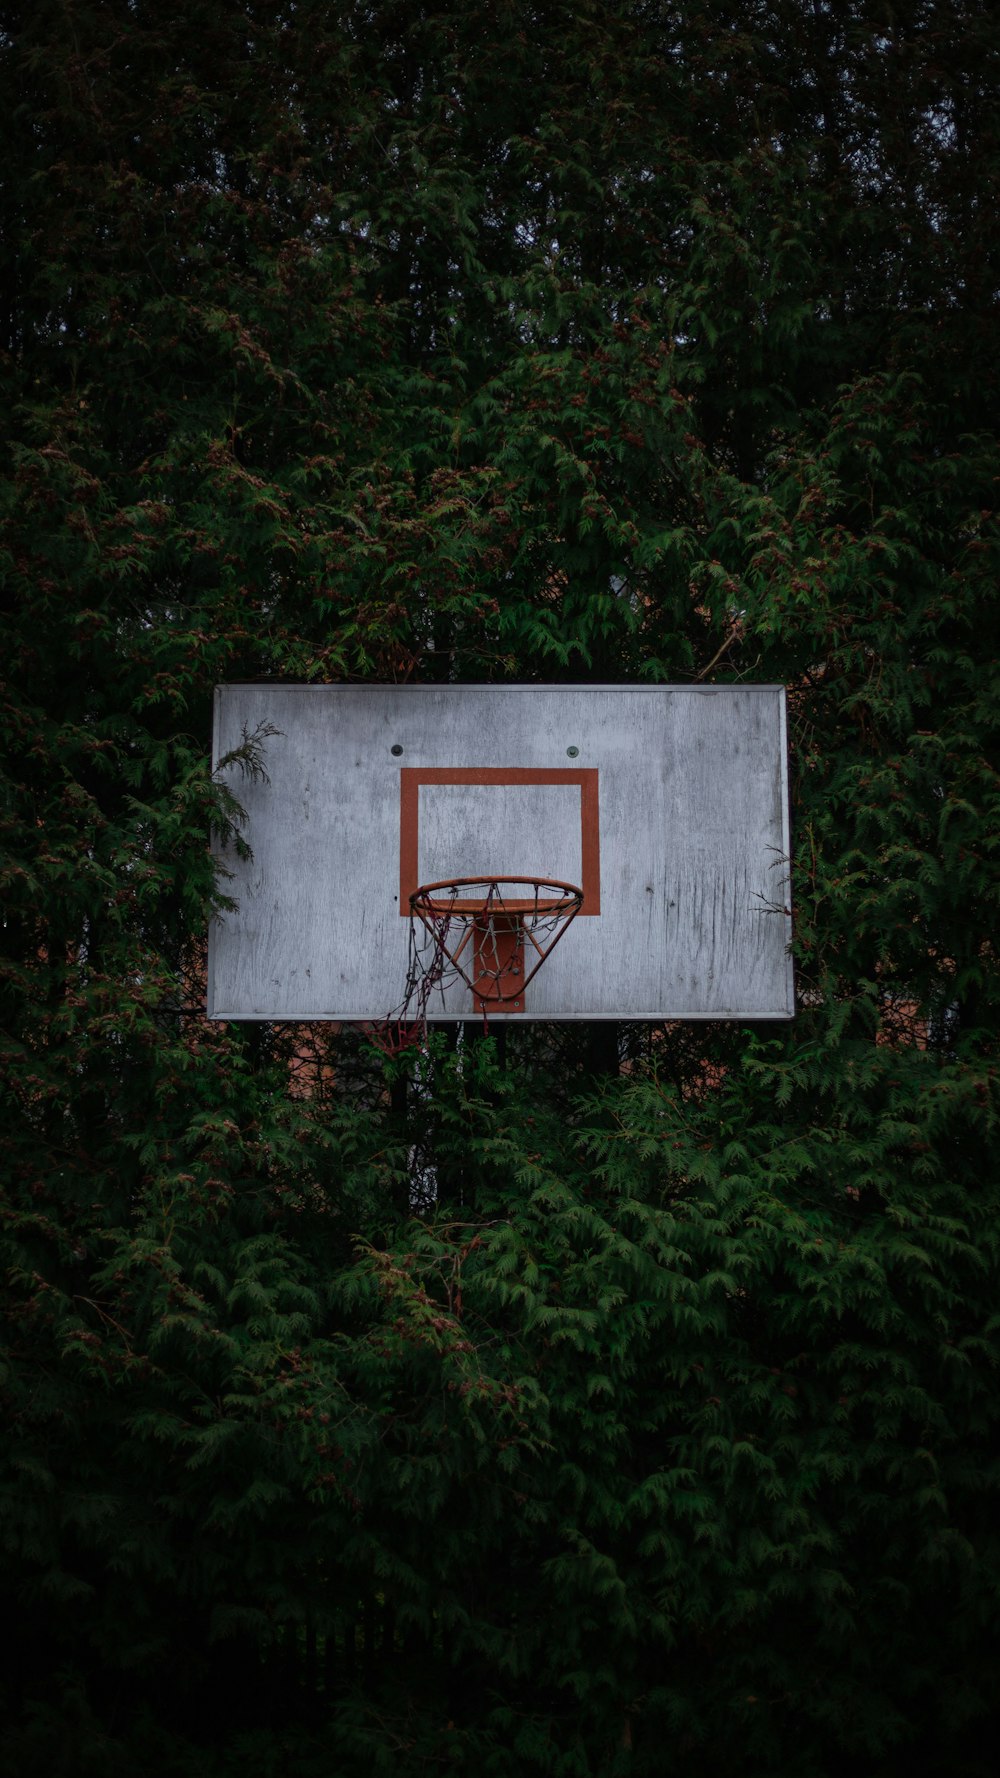 a basketball hoop in the middle of a forest